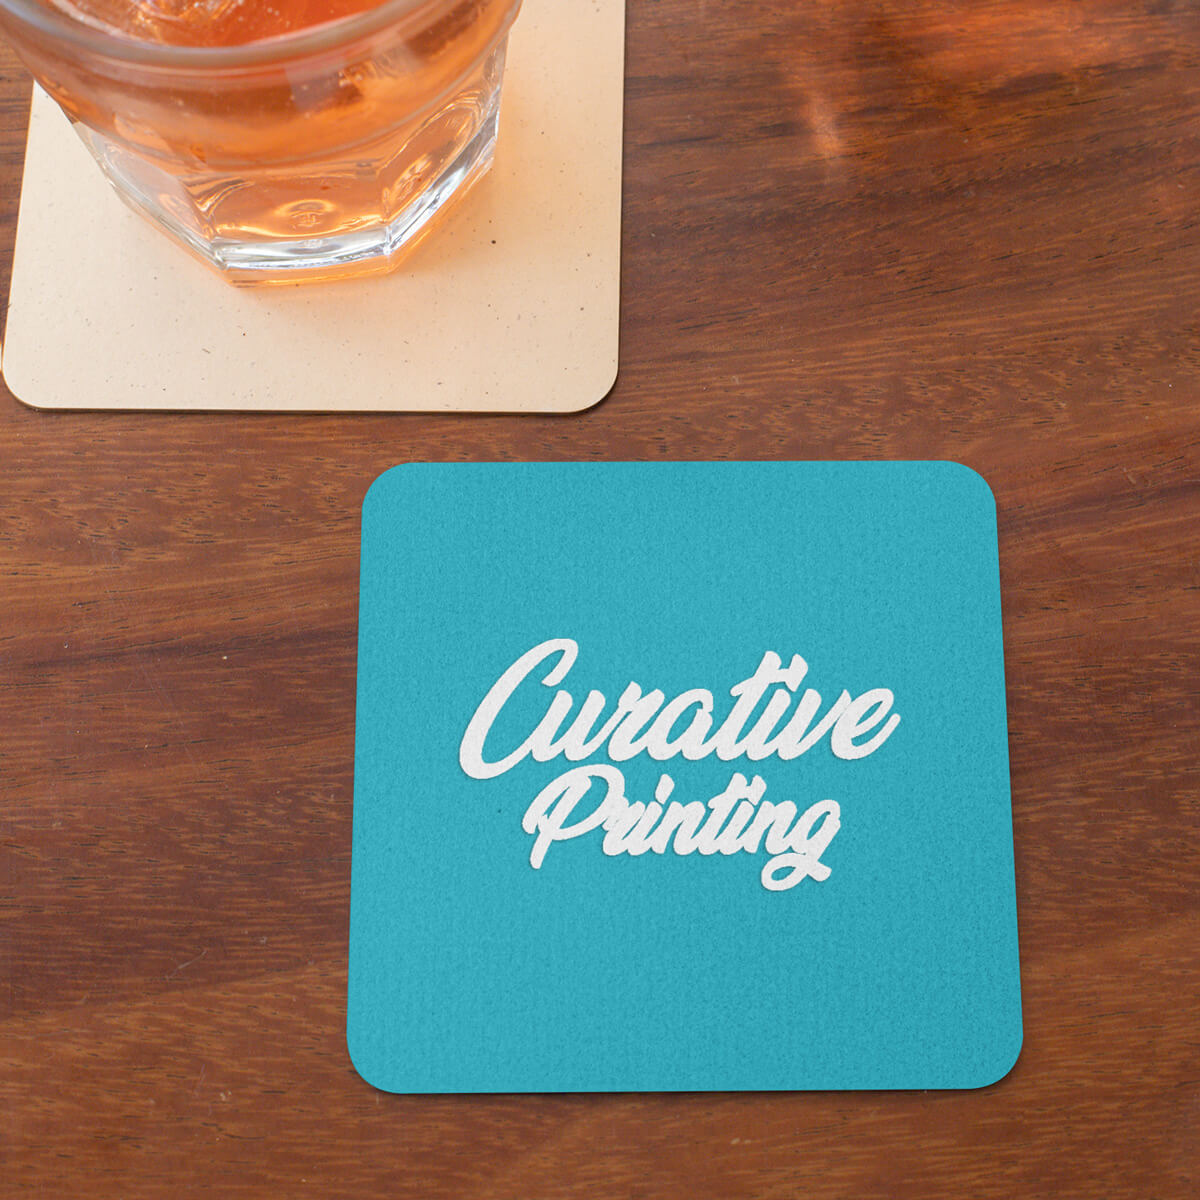 Table top with turquoise square coaster custom promotional drinkware by curative printing